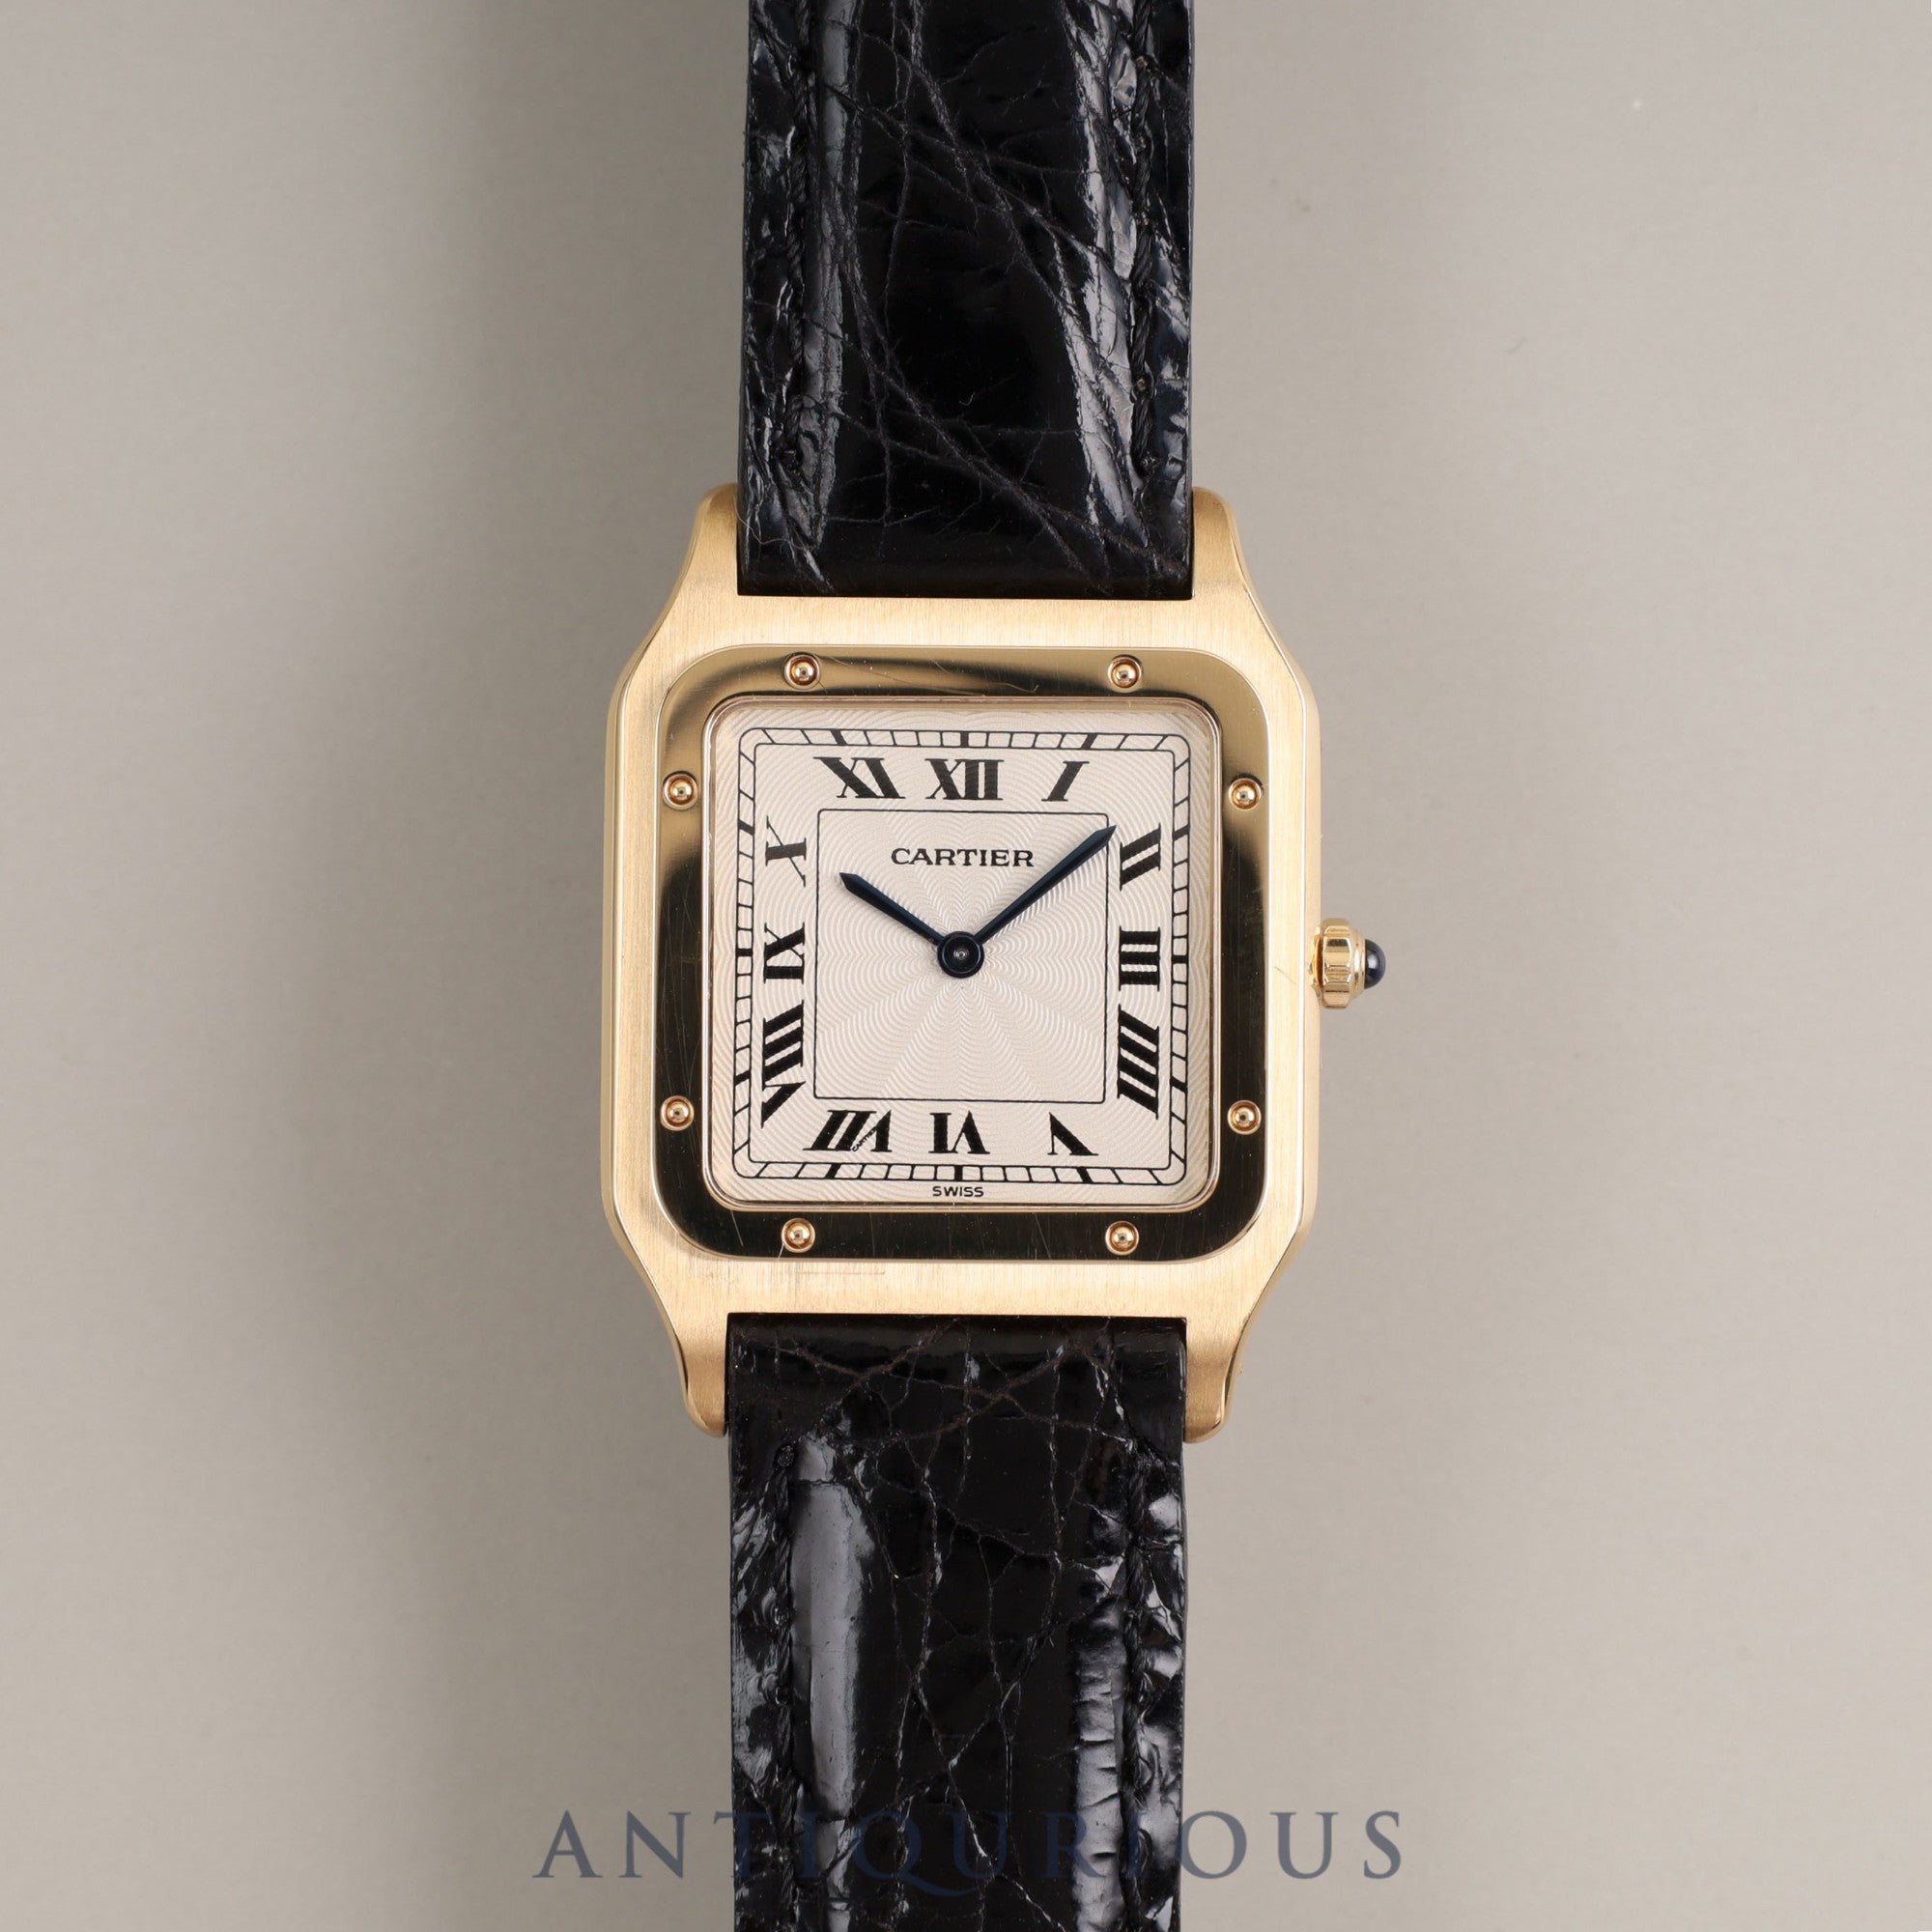 CARTIER SANTOS DUMONT LM EXTRASLIM W1505453 Manual winding Cal.21MC 750YG Leather Genuine buckle (750) Guilloché Ivory dial Box